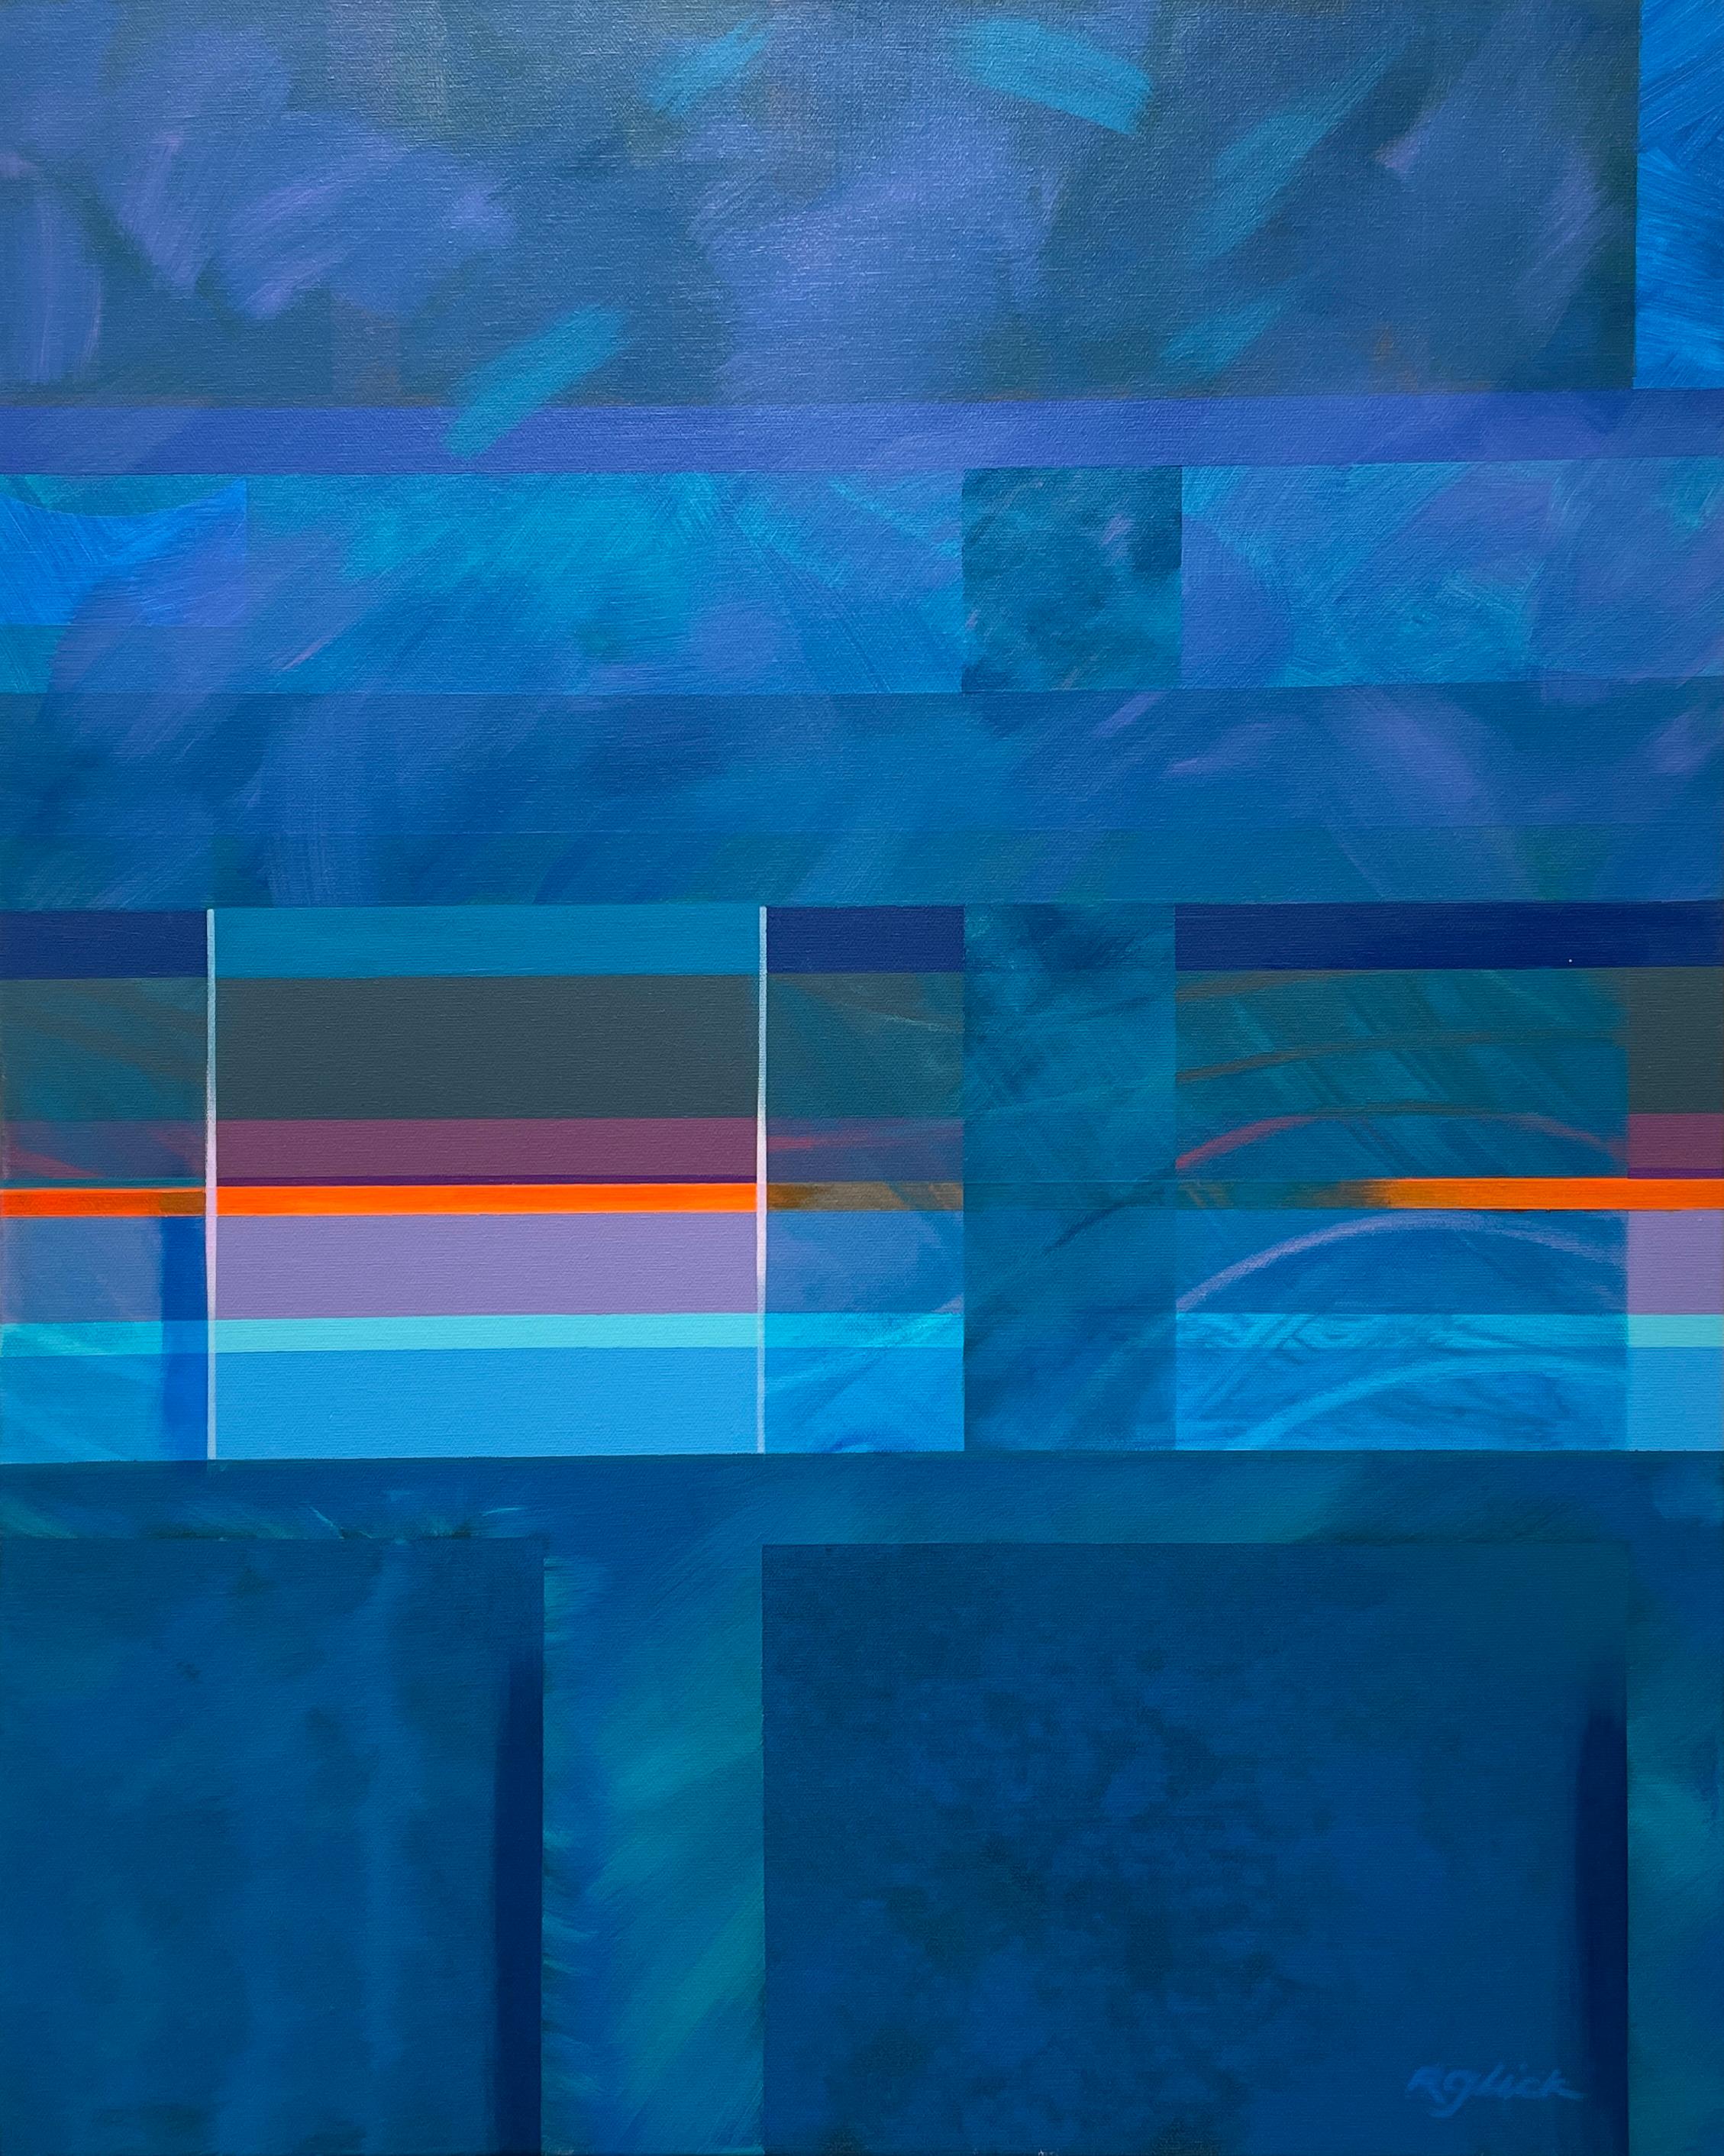 Robert Glick Abstract Painting - 'Blue Synergy' - Vivid Blue Geometric Abstract - Bright Acrylic Painting